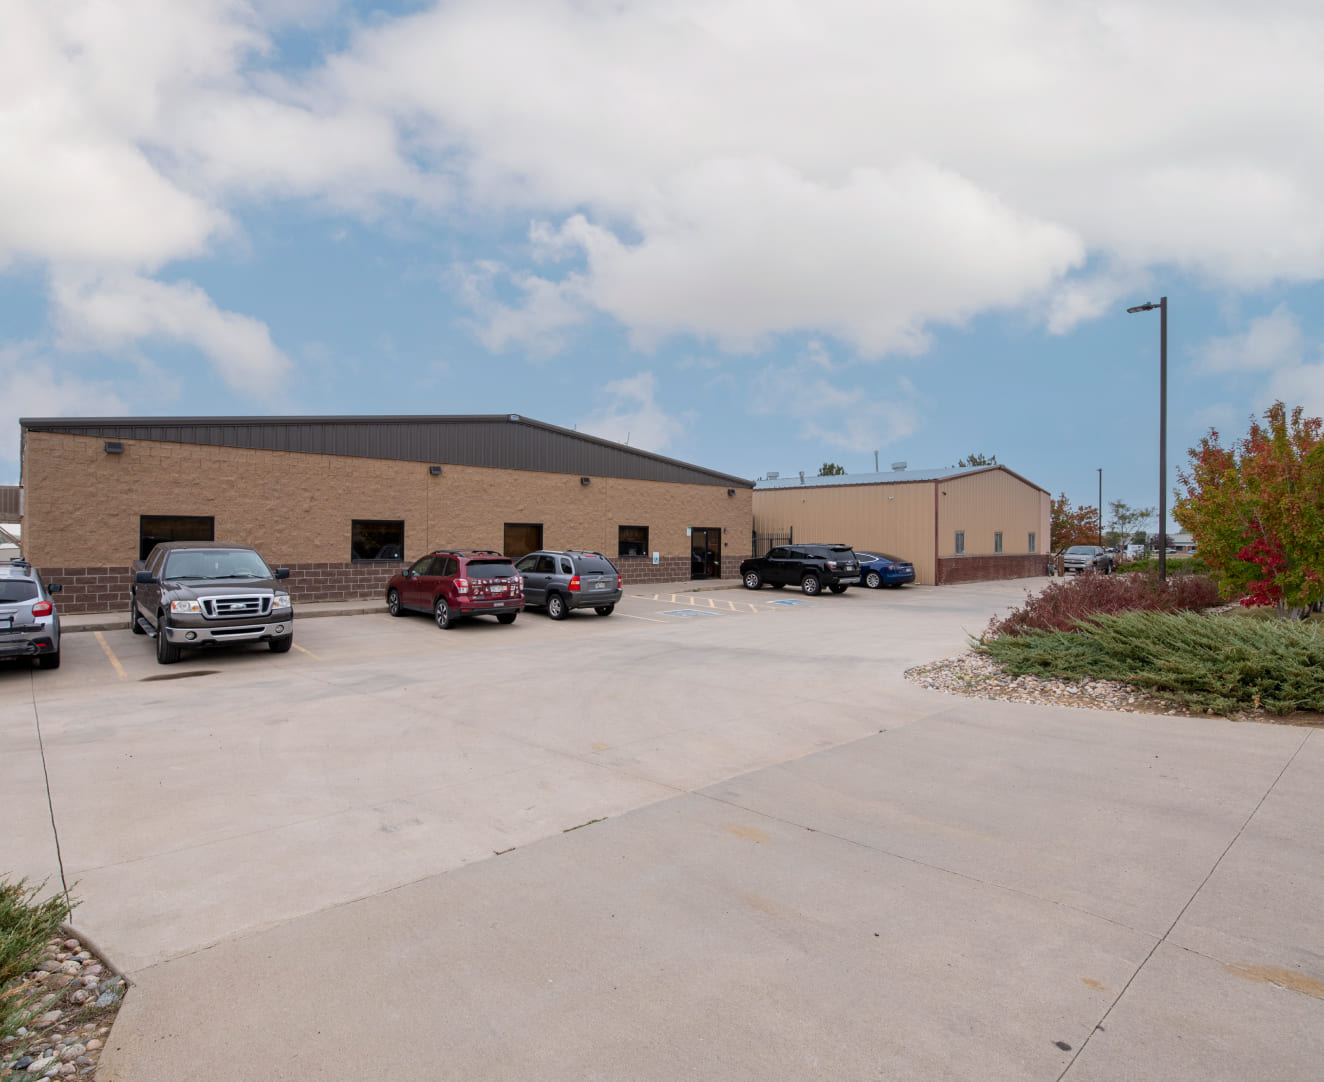 The parking lot and main entrance to the industrial property located at 599 71st Street in Loveland, CO.